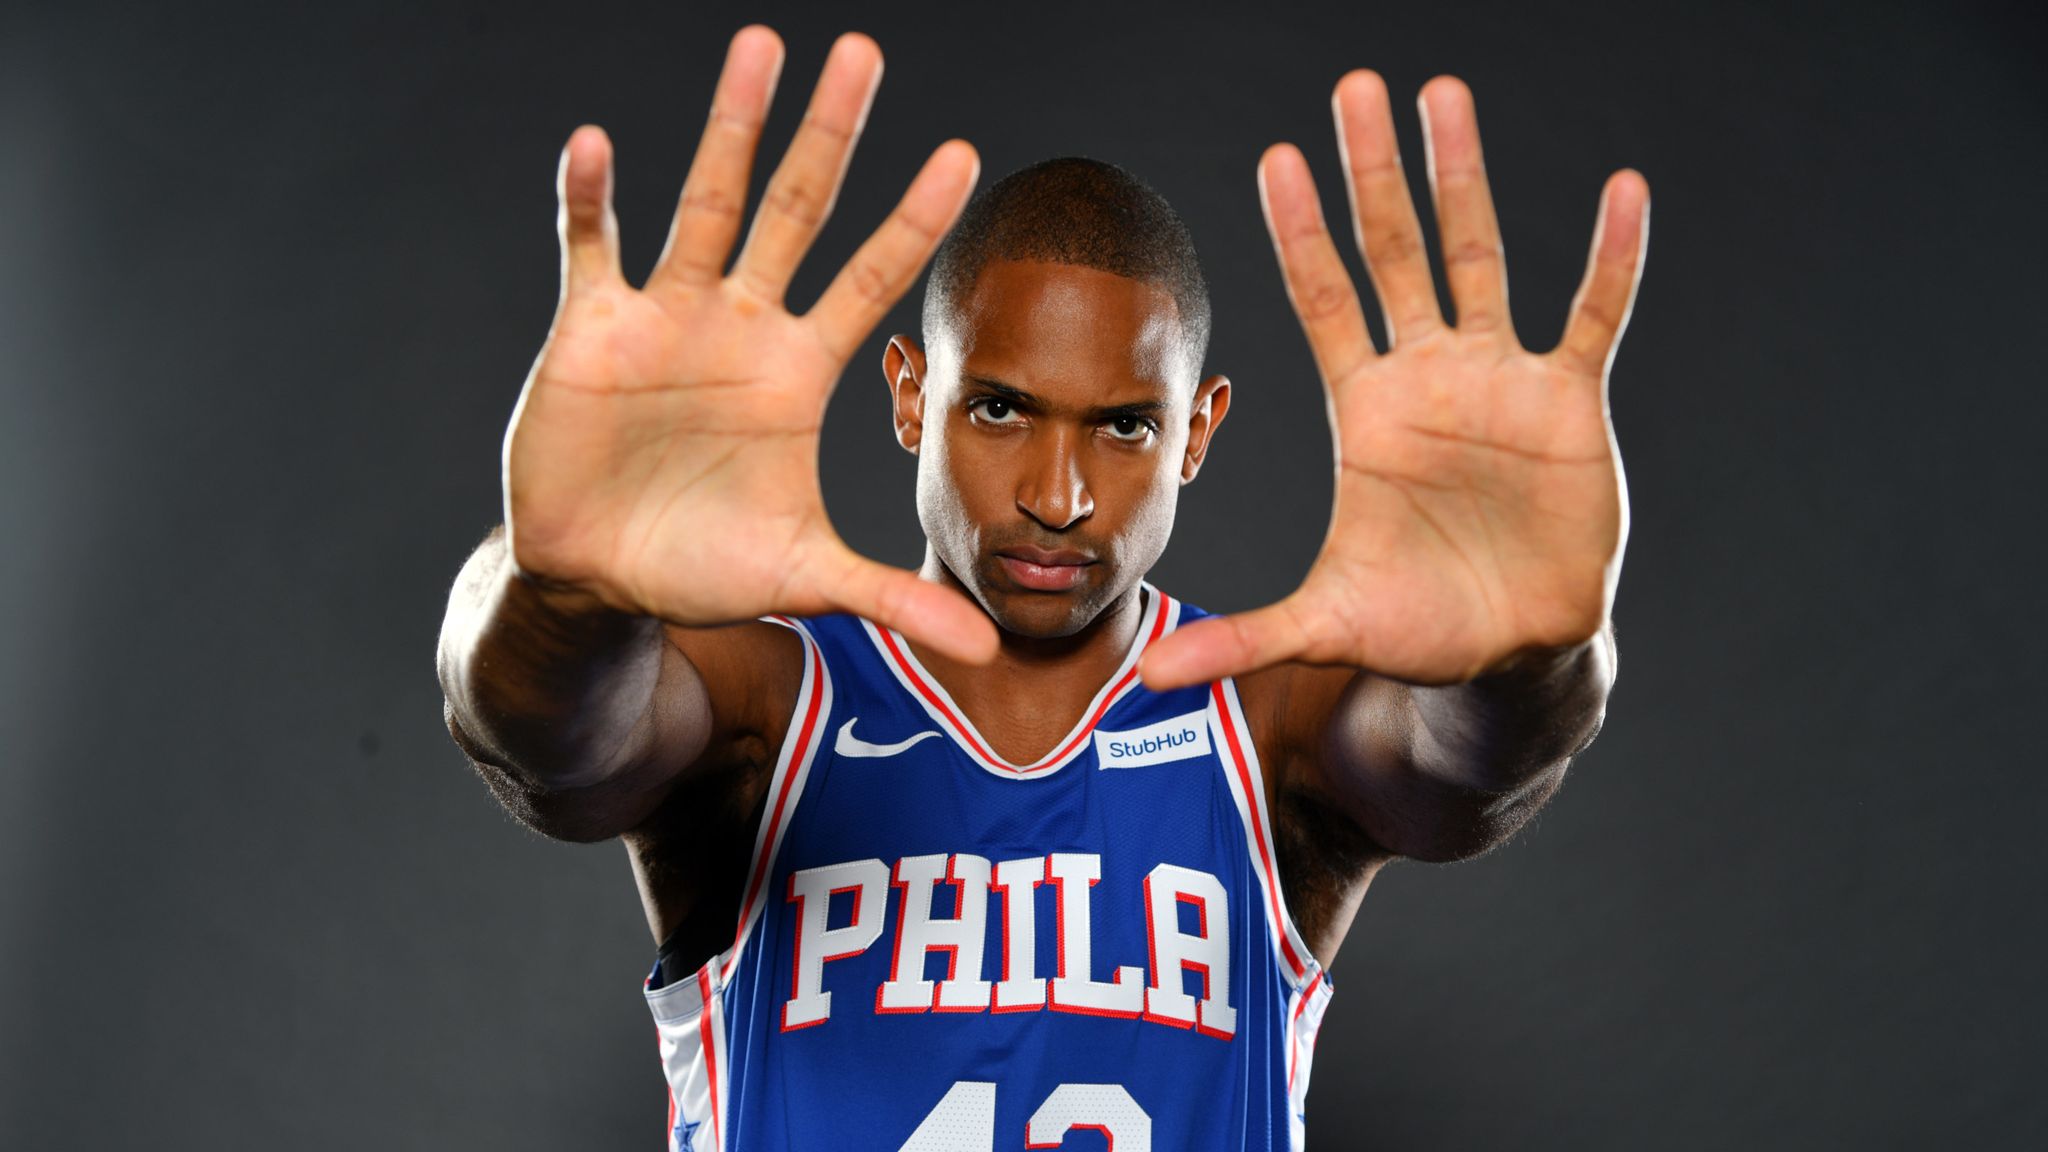 Al Horford will help Philadelphia 76ers in a multitude of ways, say NBA